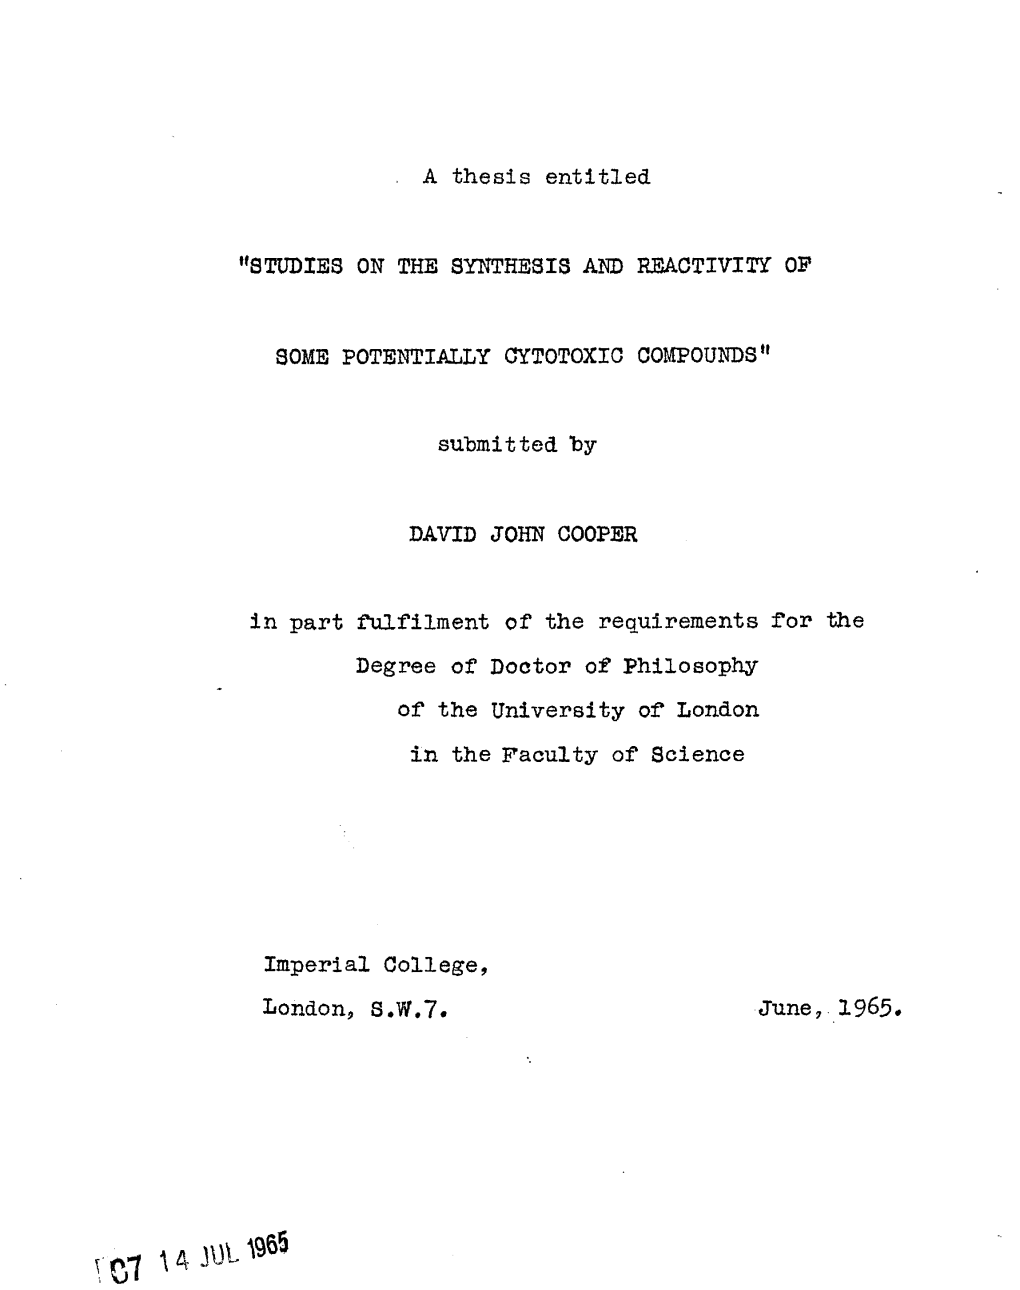 A Thesis Entitled "STUDIES on the SYNTHESIS and REACTIVITY OP